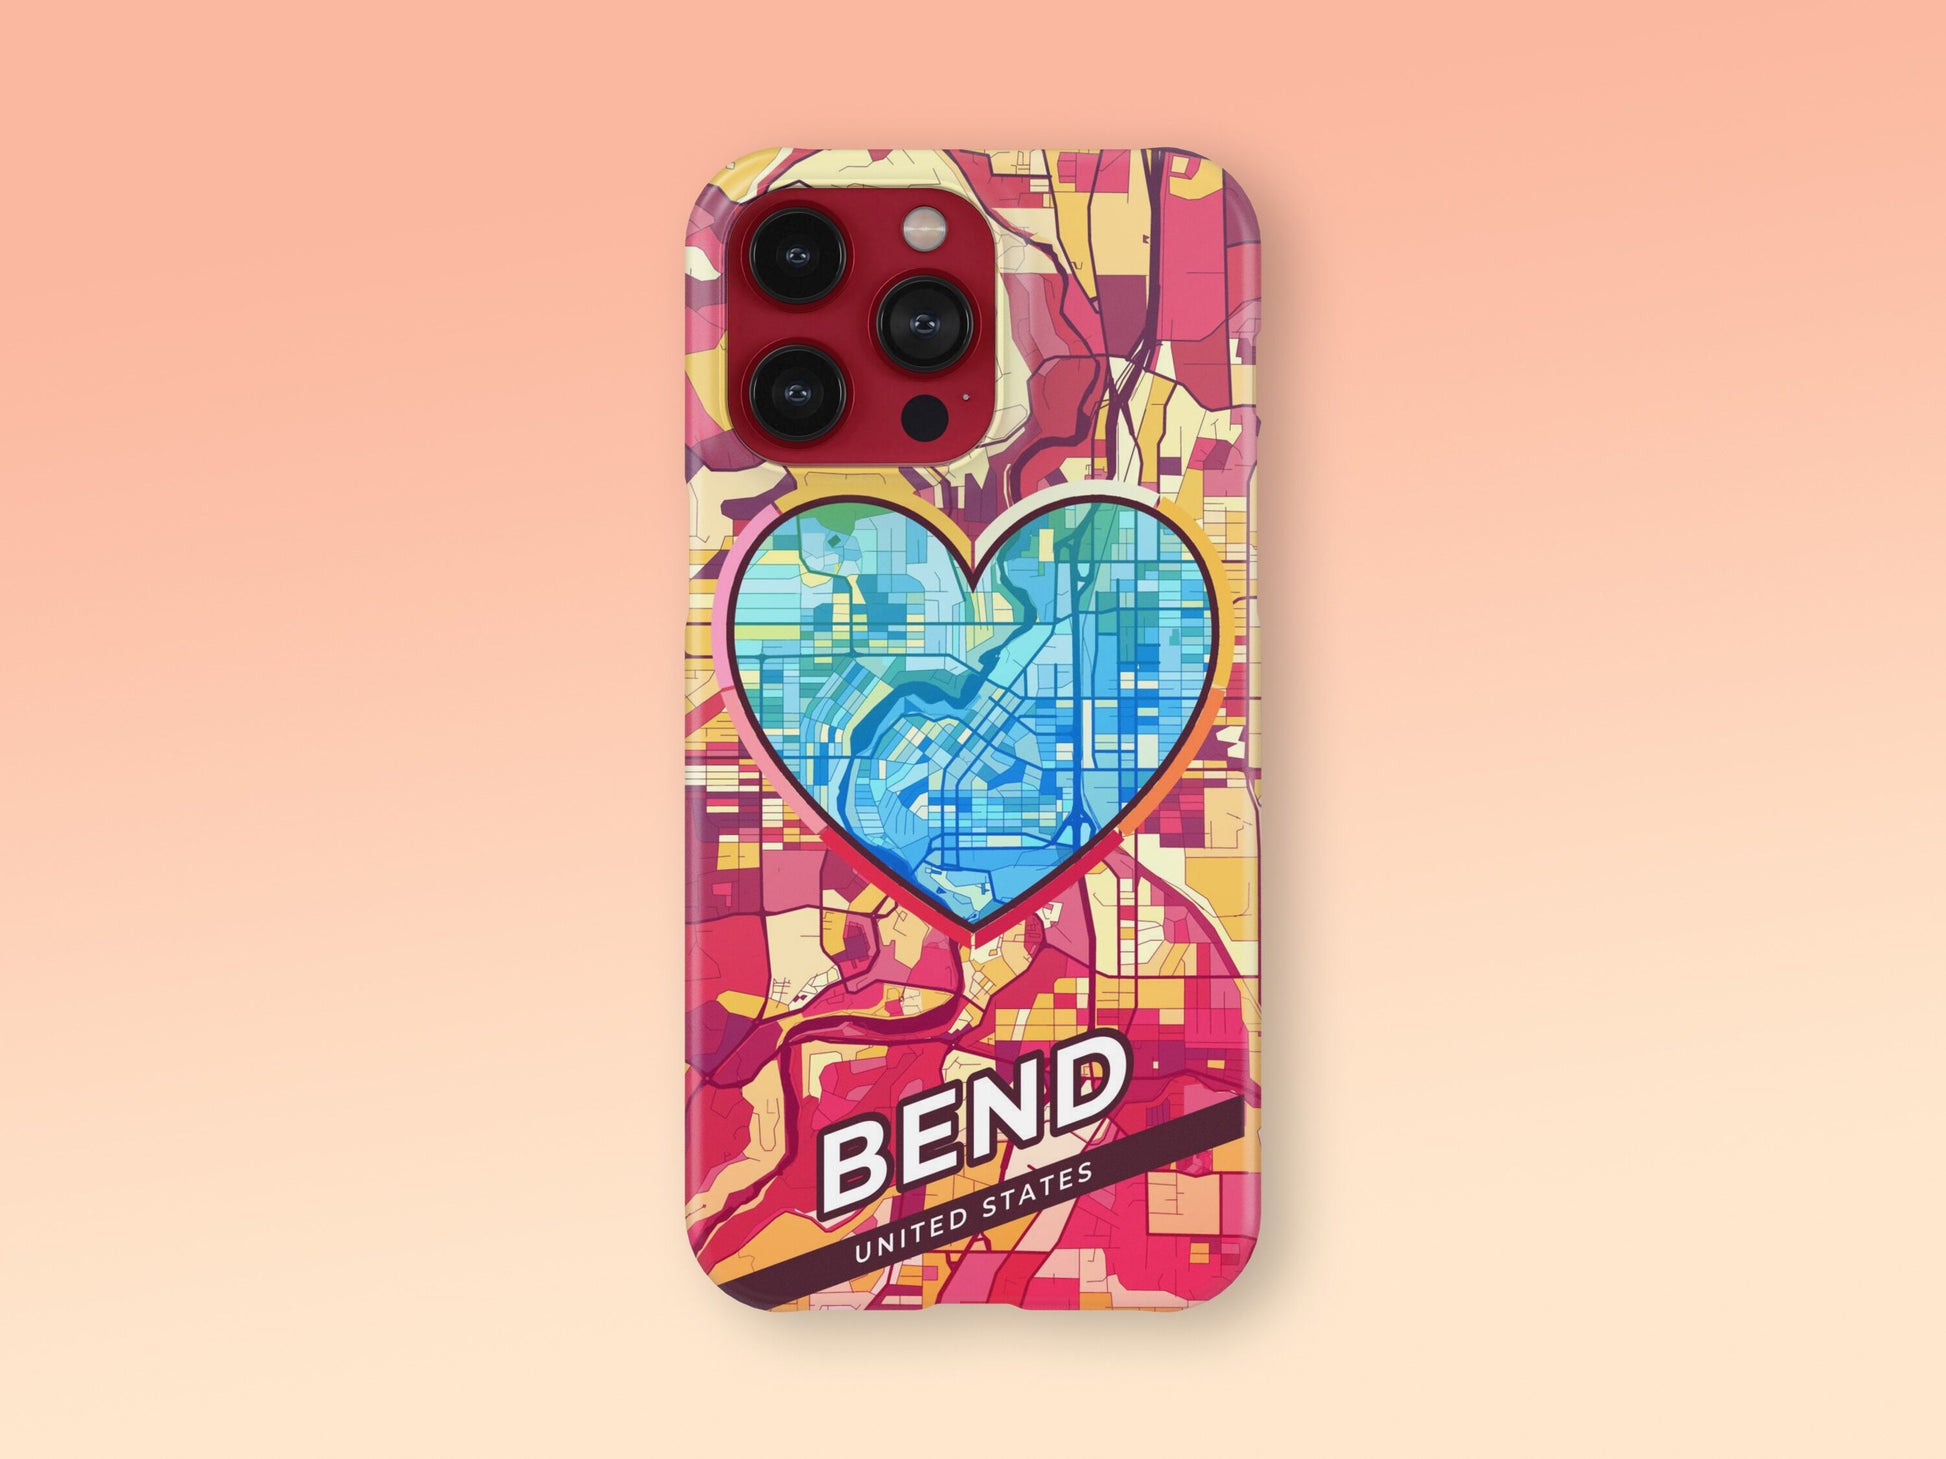 Bend Oregon slim phone case with colorful icon. Birthday, wedding or housewarming gift. Couple match cases. 2